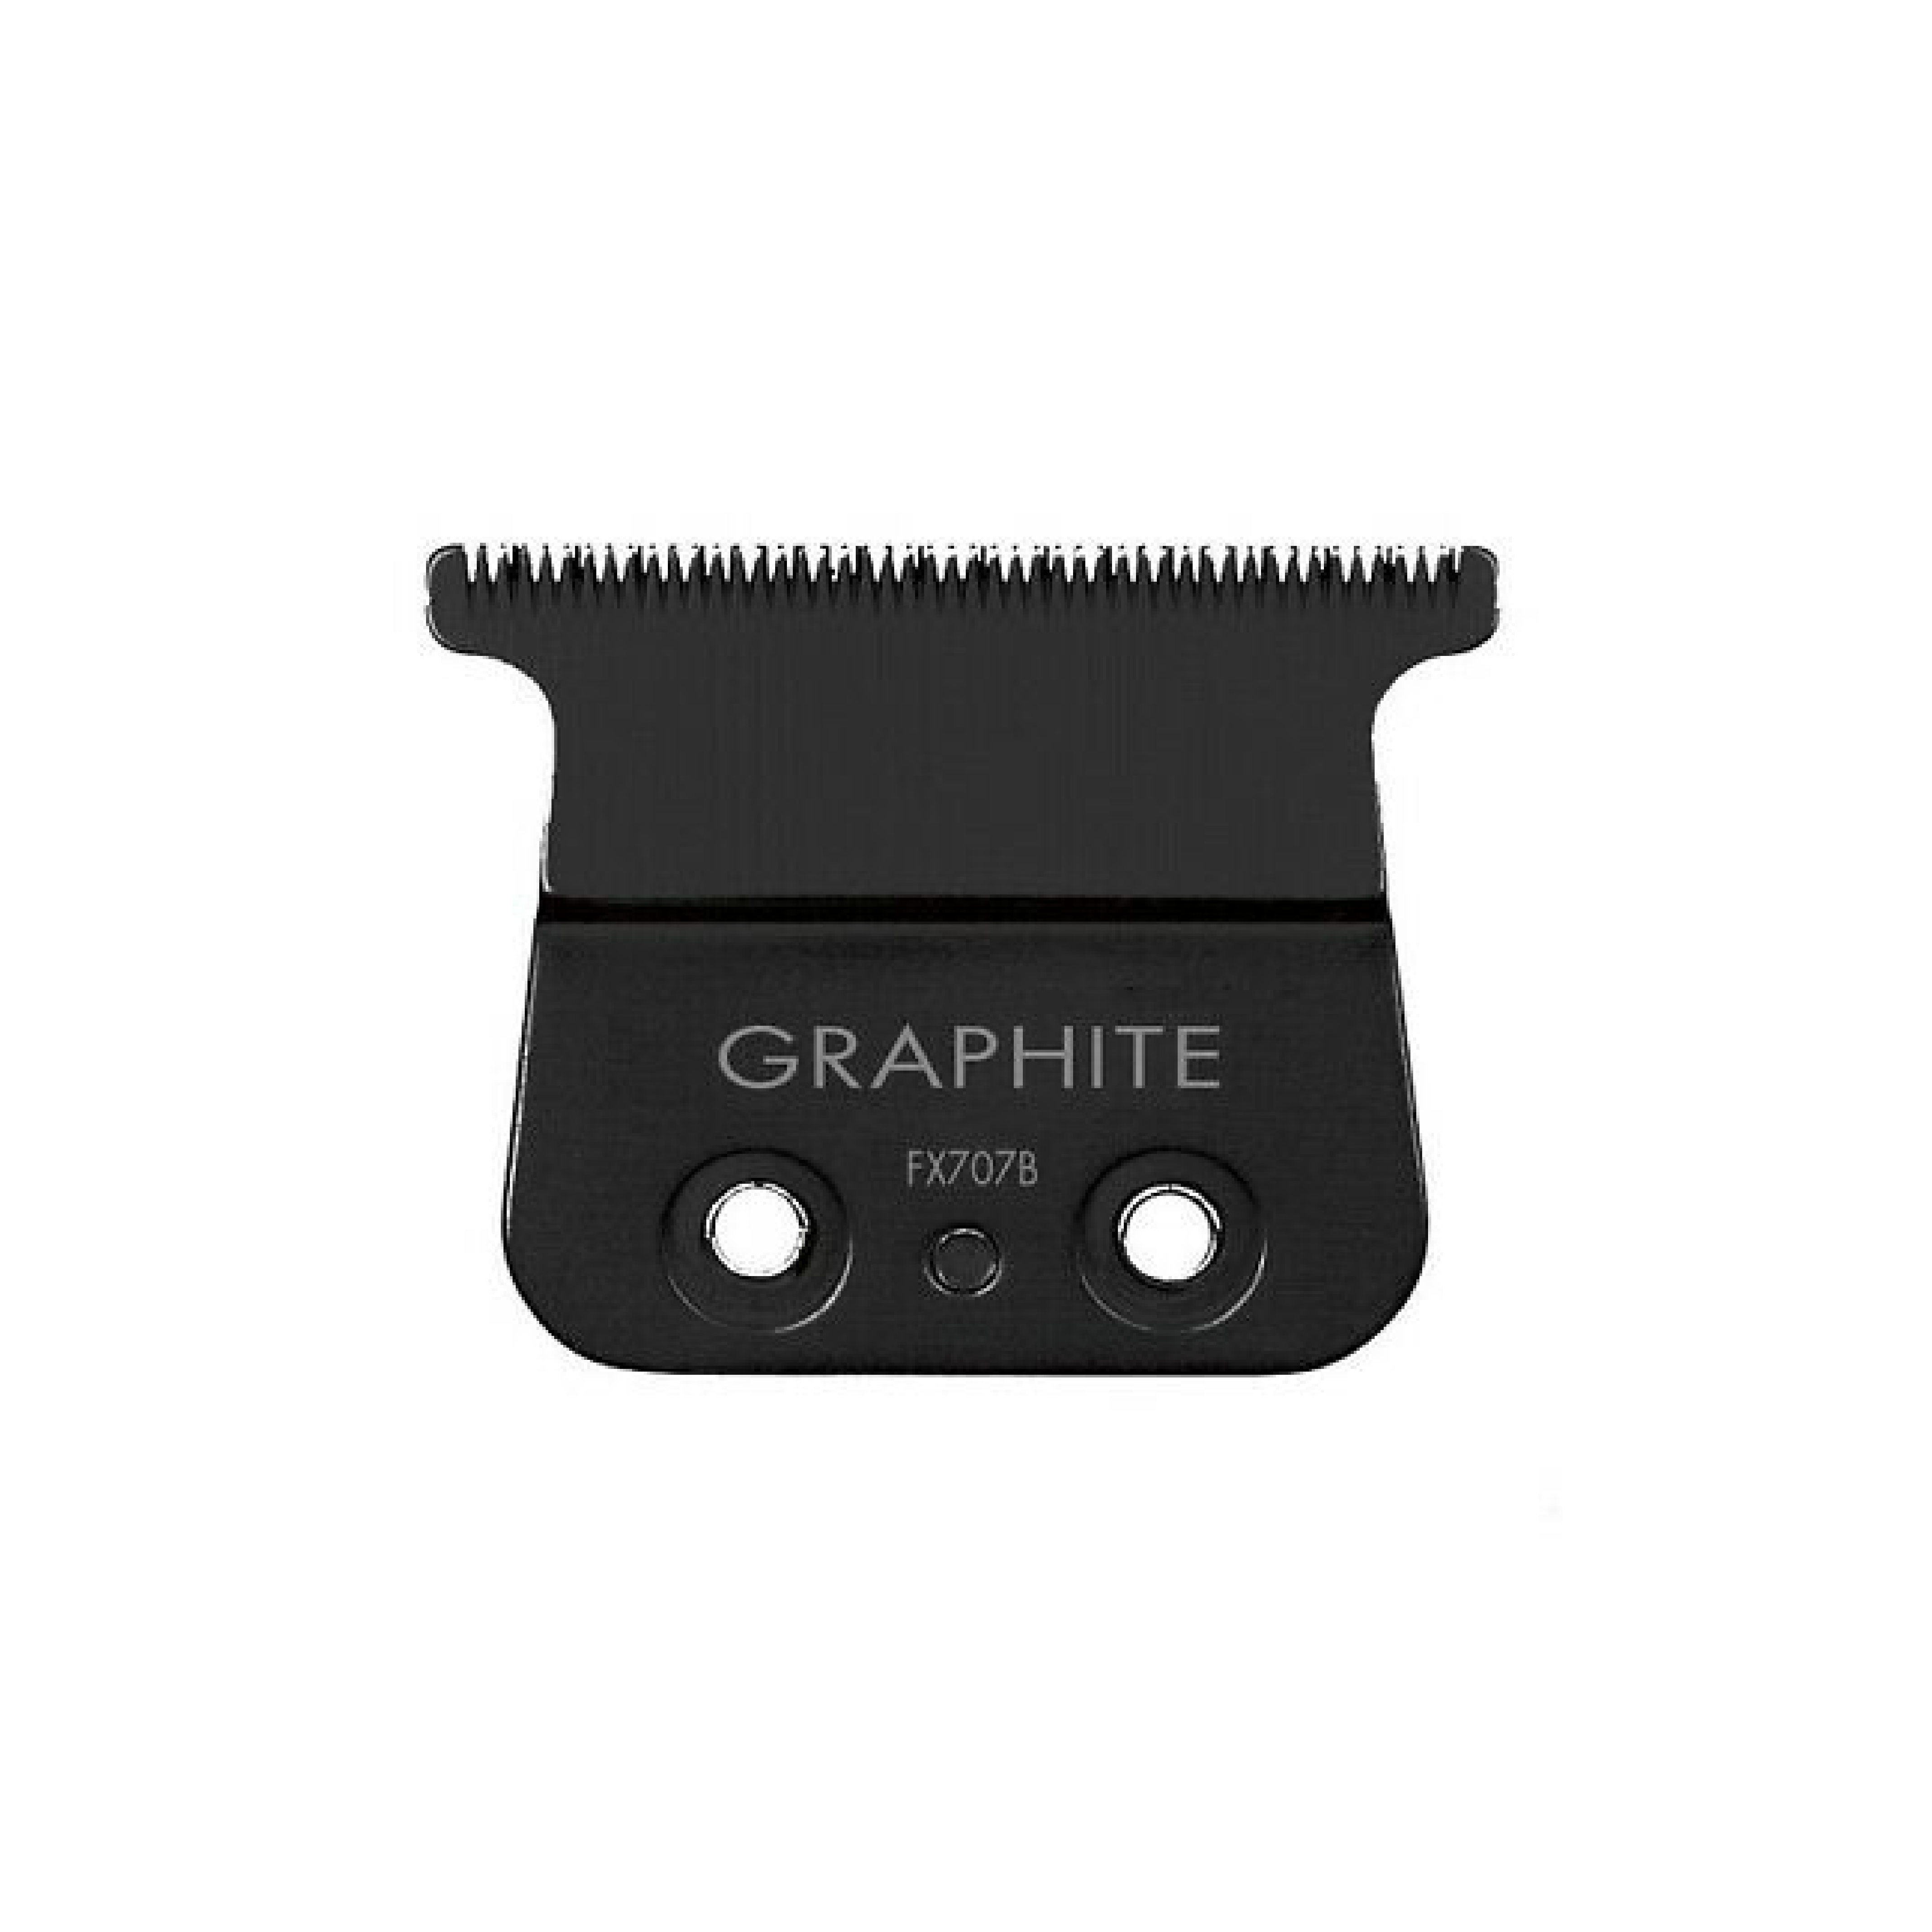 Babyliss Pro T-Blade Graphite Fine Tooth Black Replacement Blade - FX707B